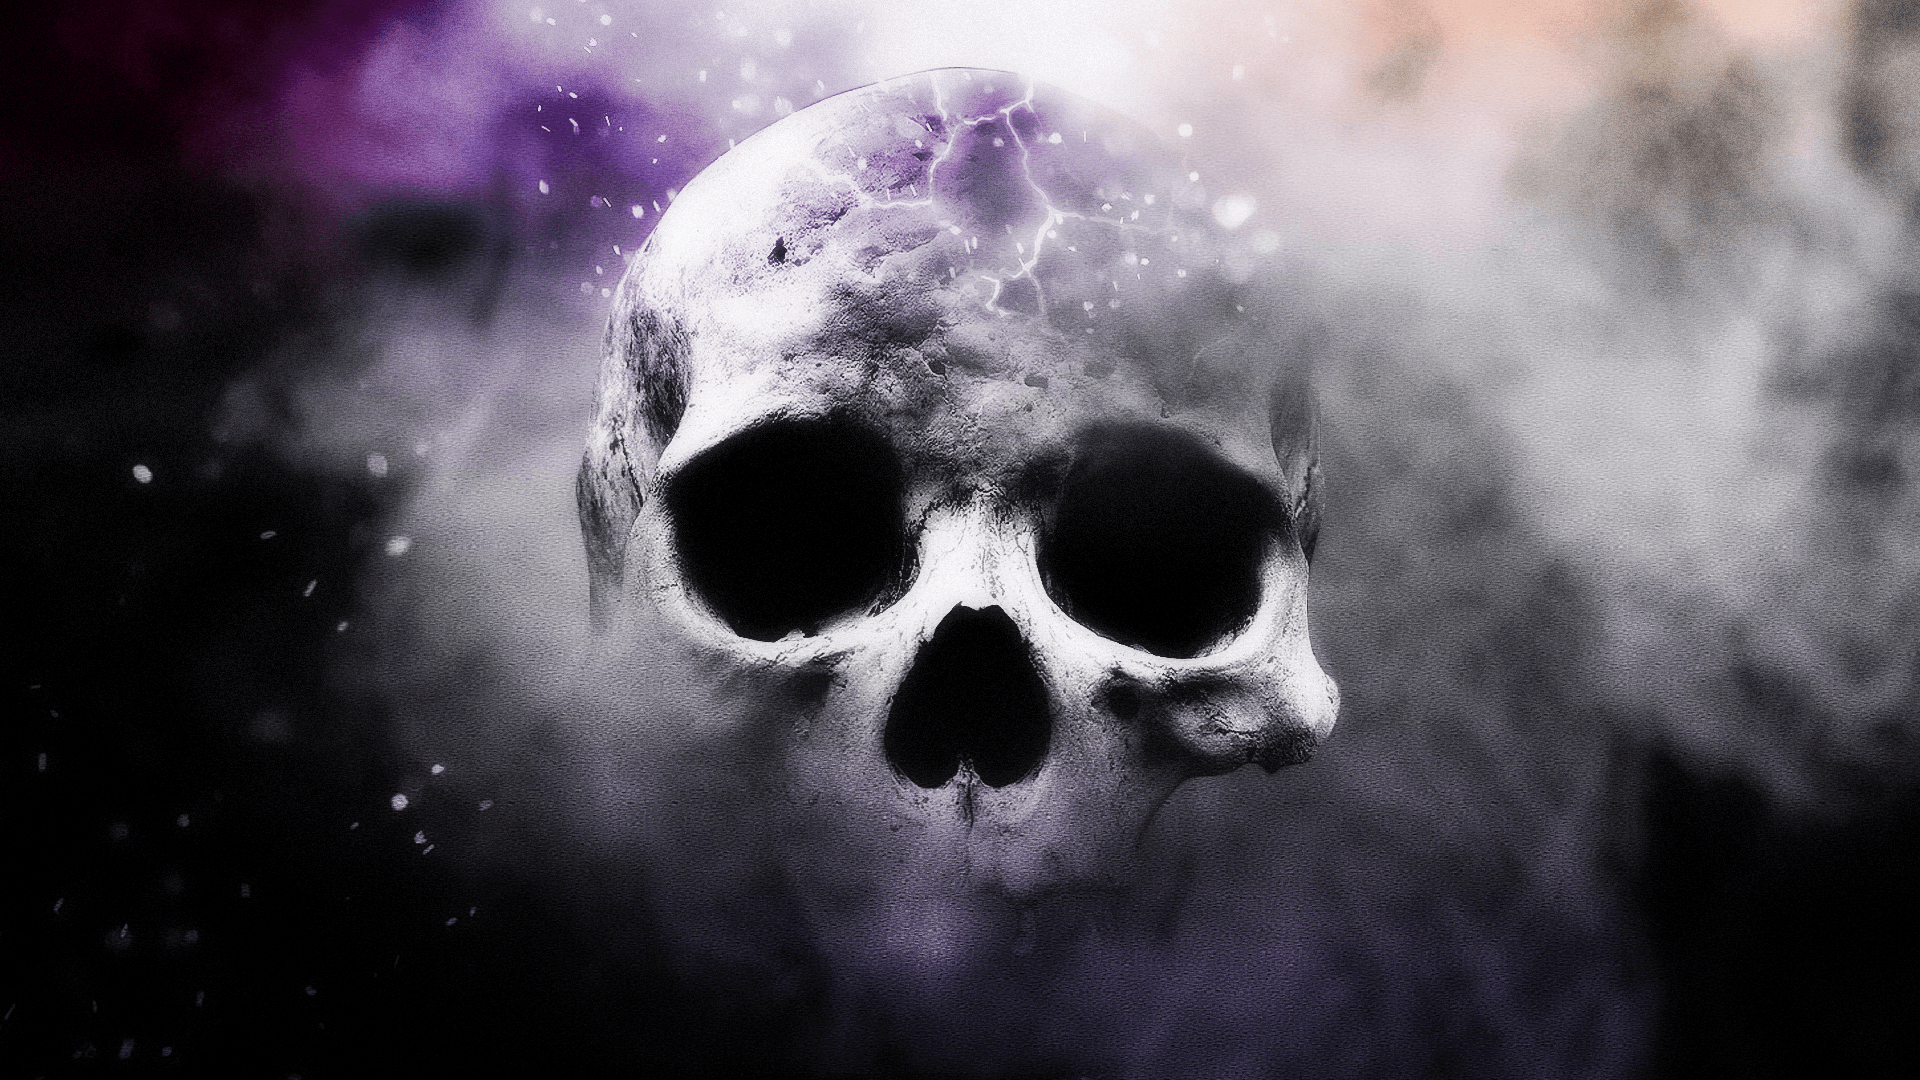 Skull With Colorful Skull And Other Skulls On A Dark Background, Sick  Background Picture Background Image And Wallpaper for Free Download